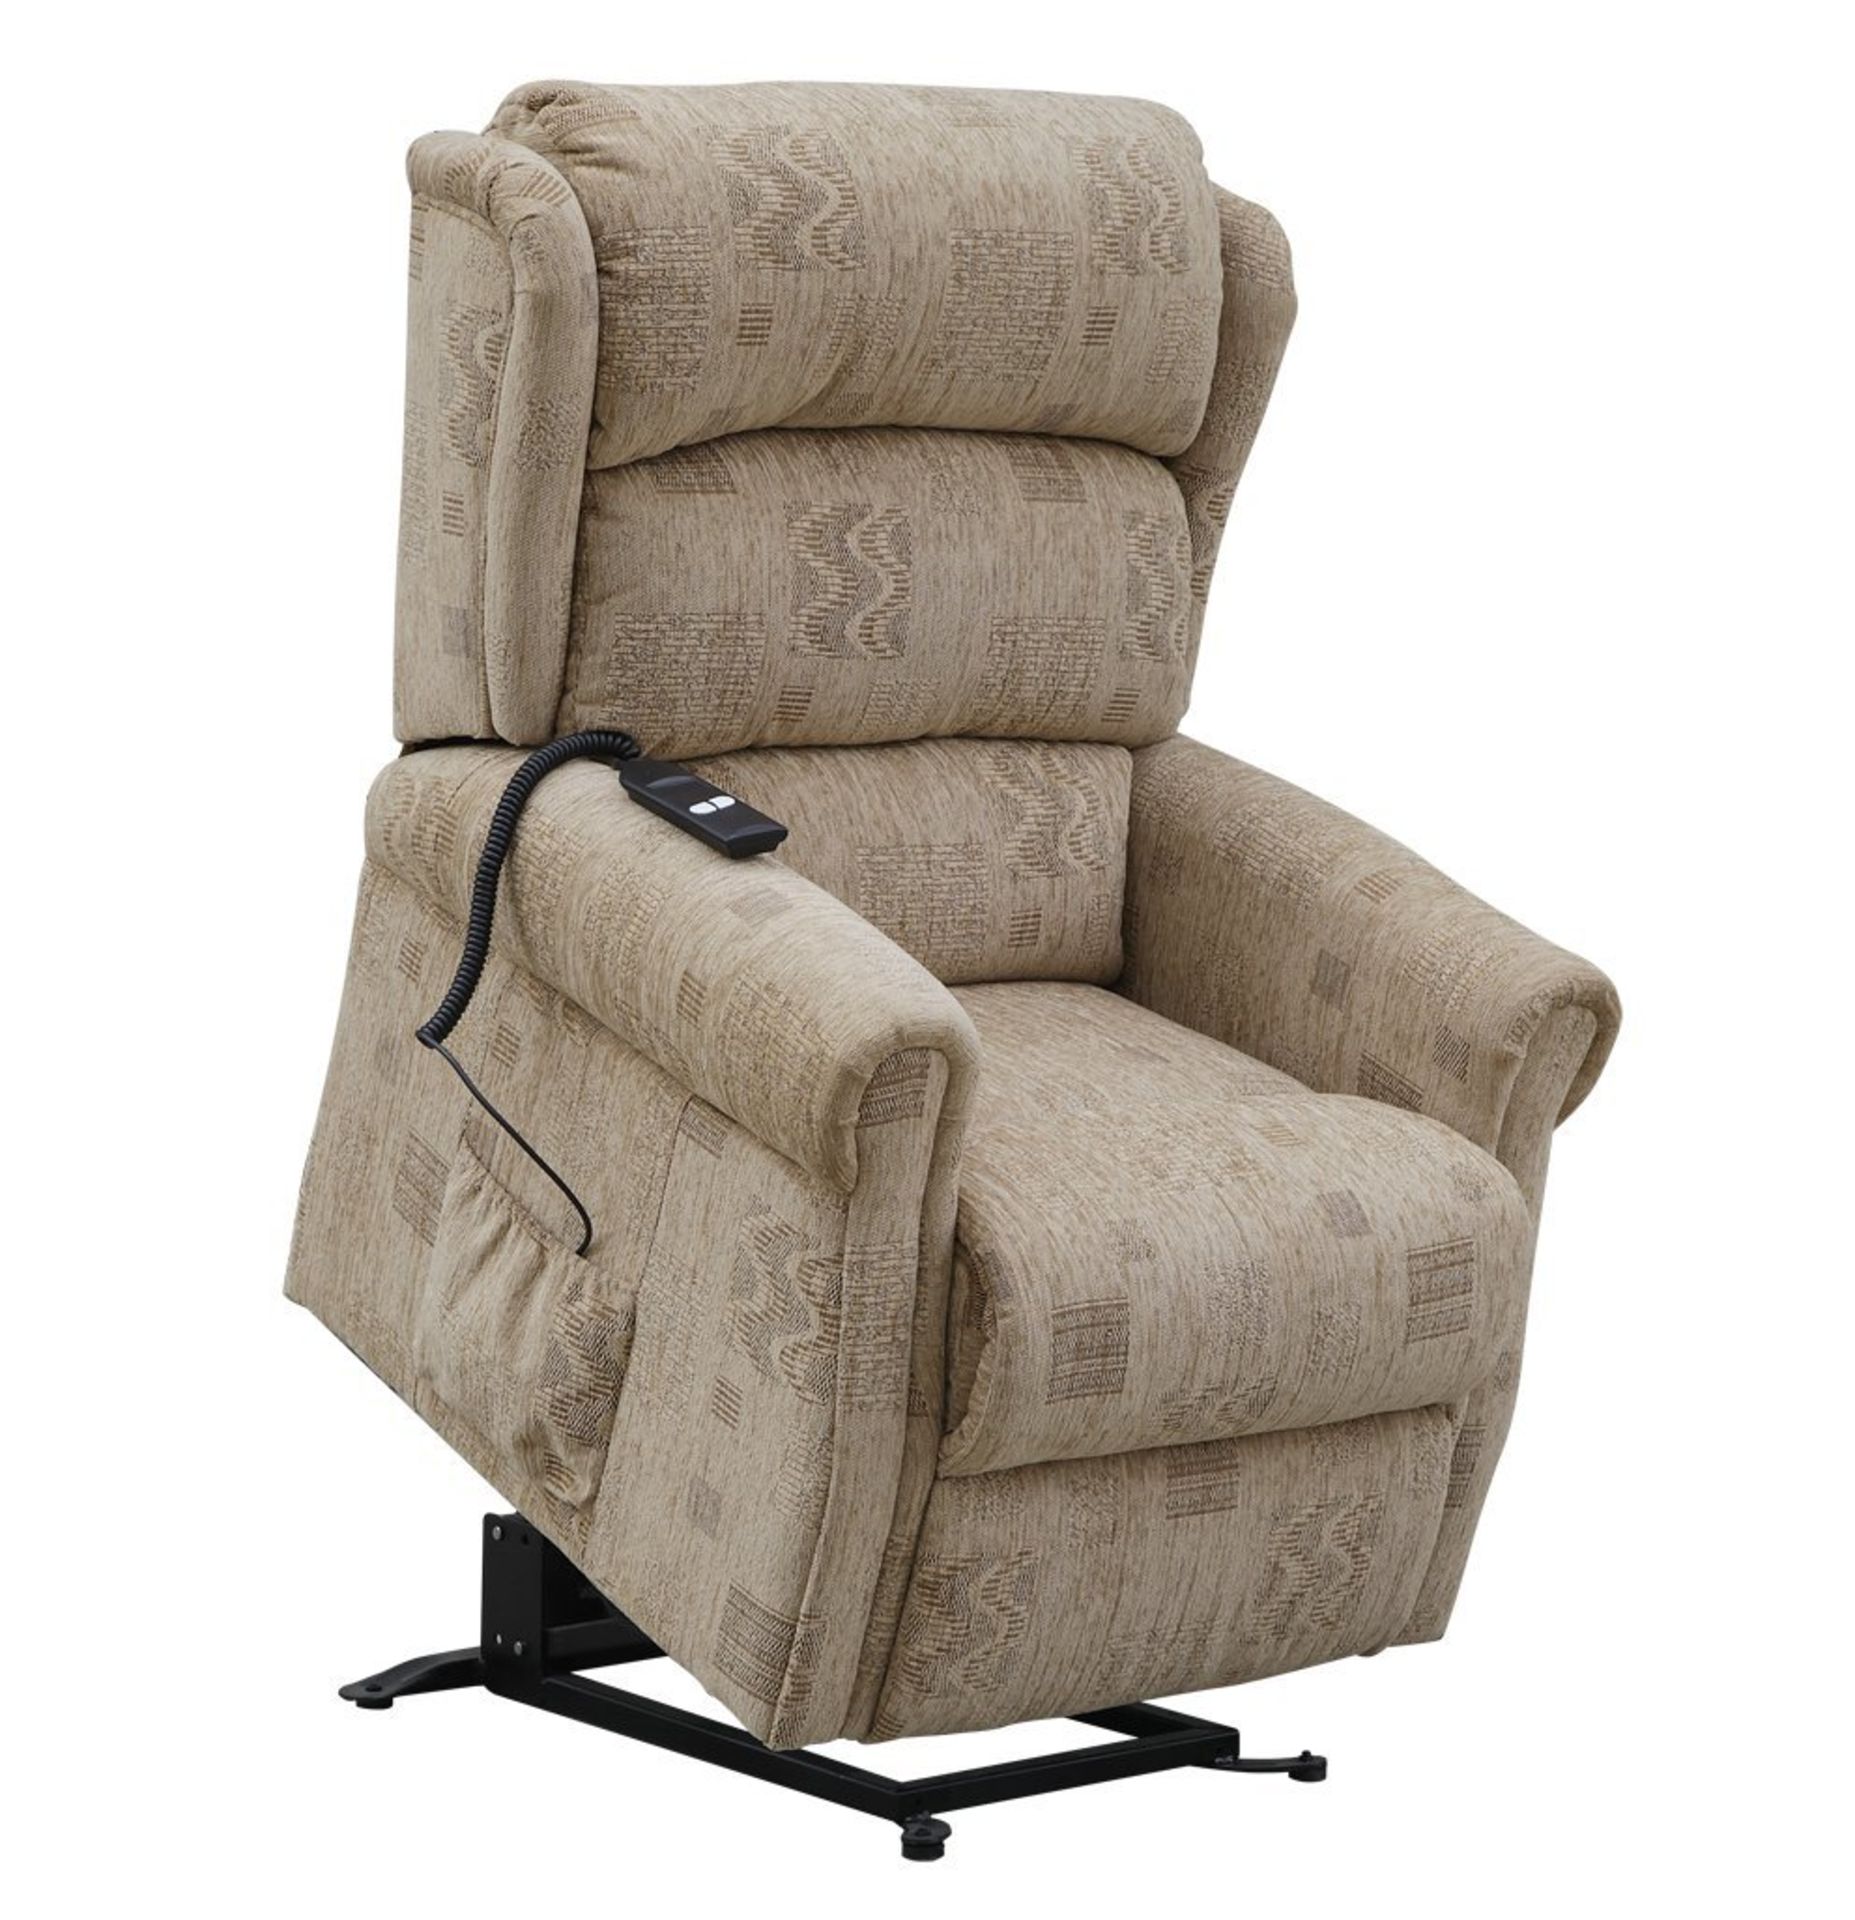 Brand New Boxed Cambridge Fabric Electric Rise And Recliner Chair In Soho Patchwork Oatmealæ - Image 2 of 2